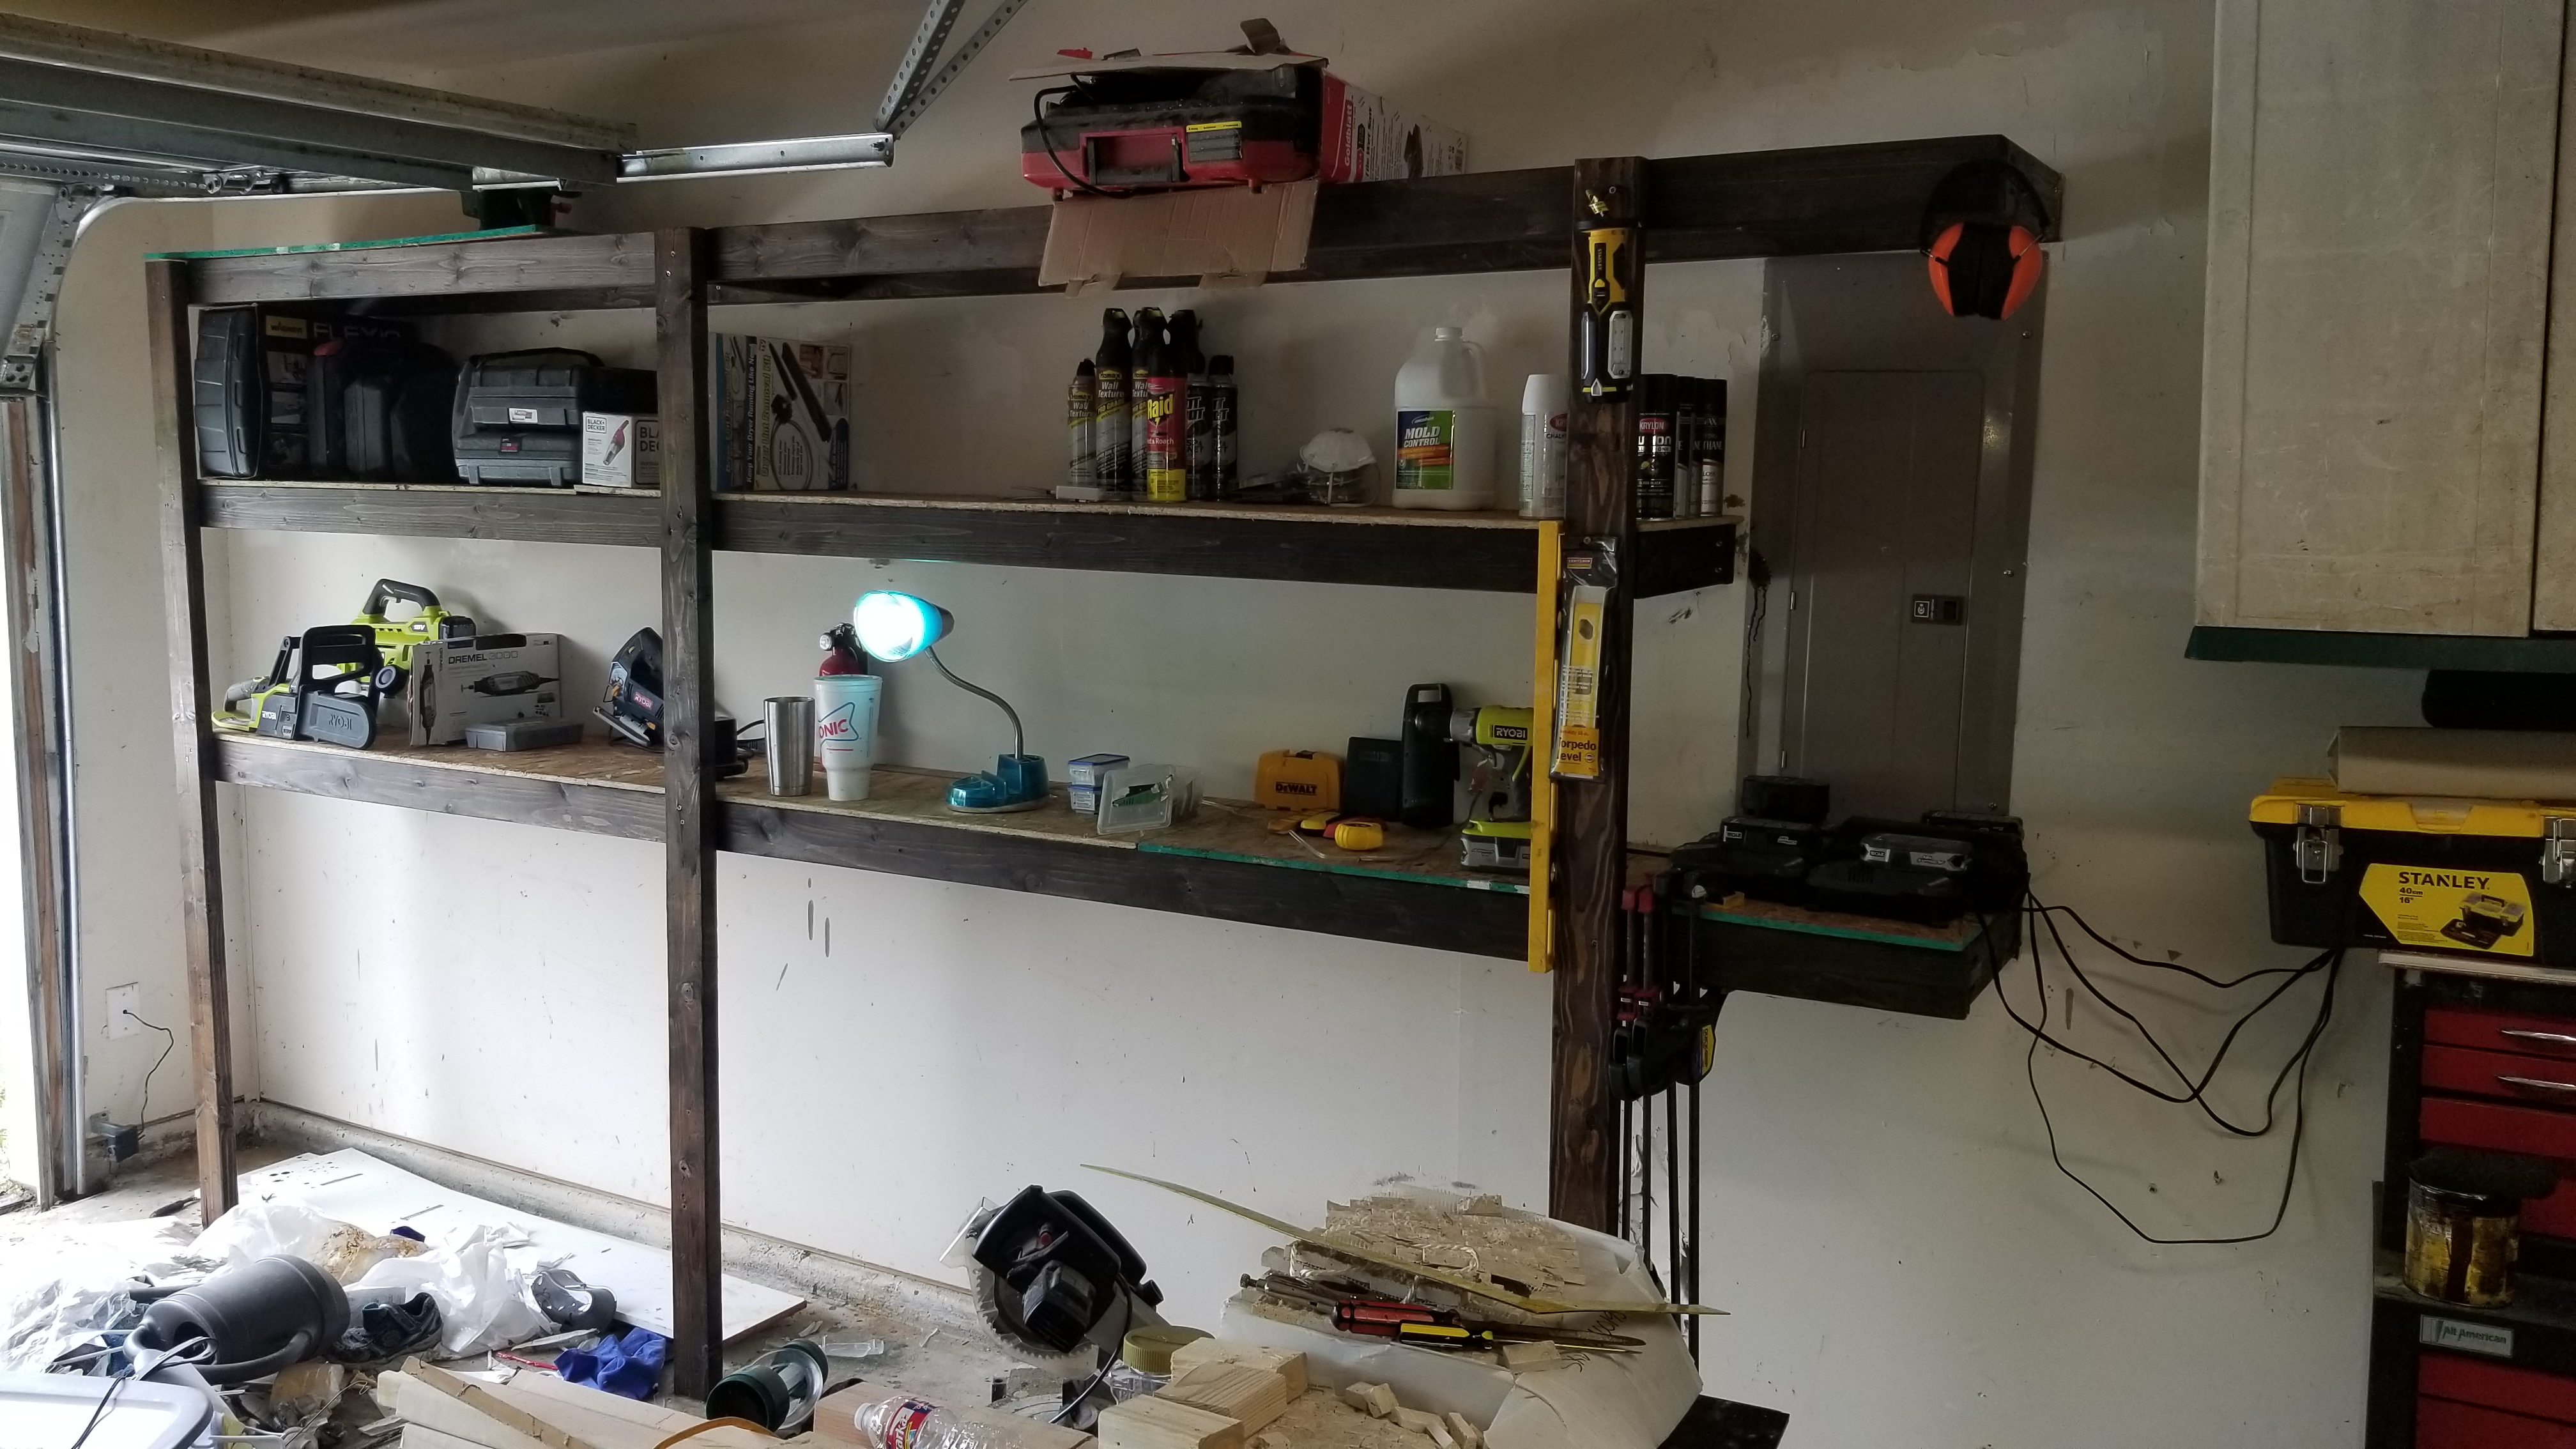 Just about down with Garage Shelves